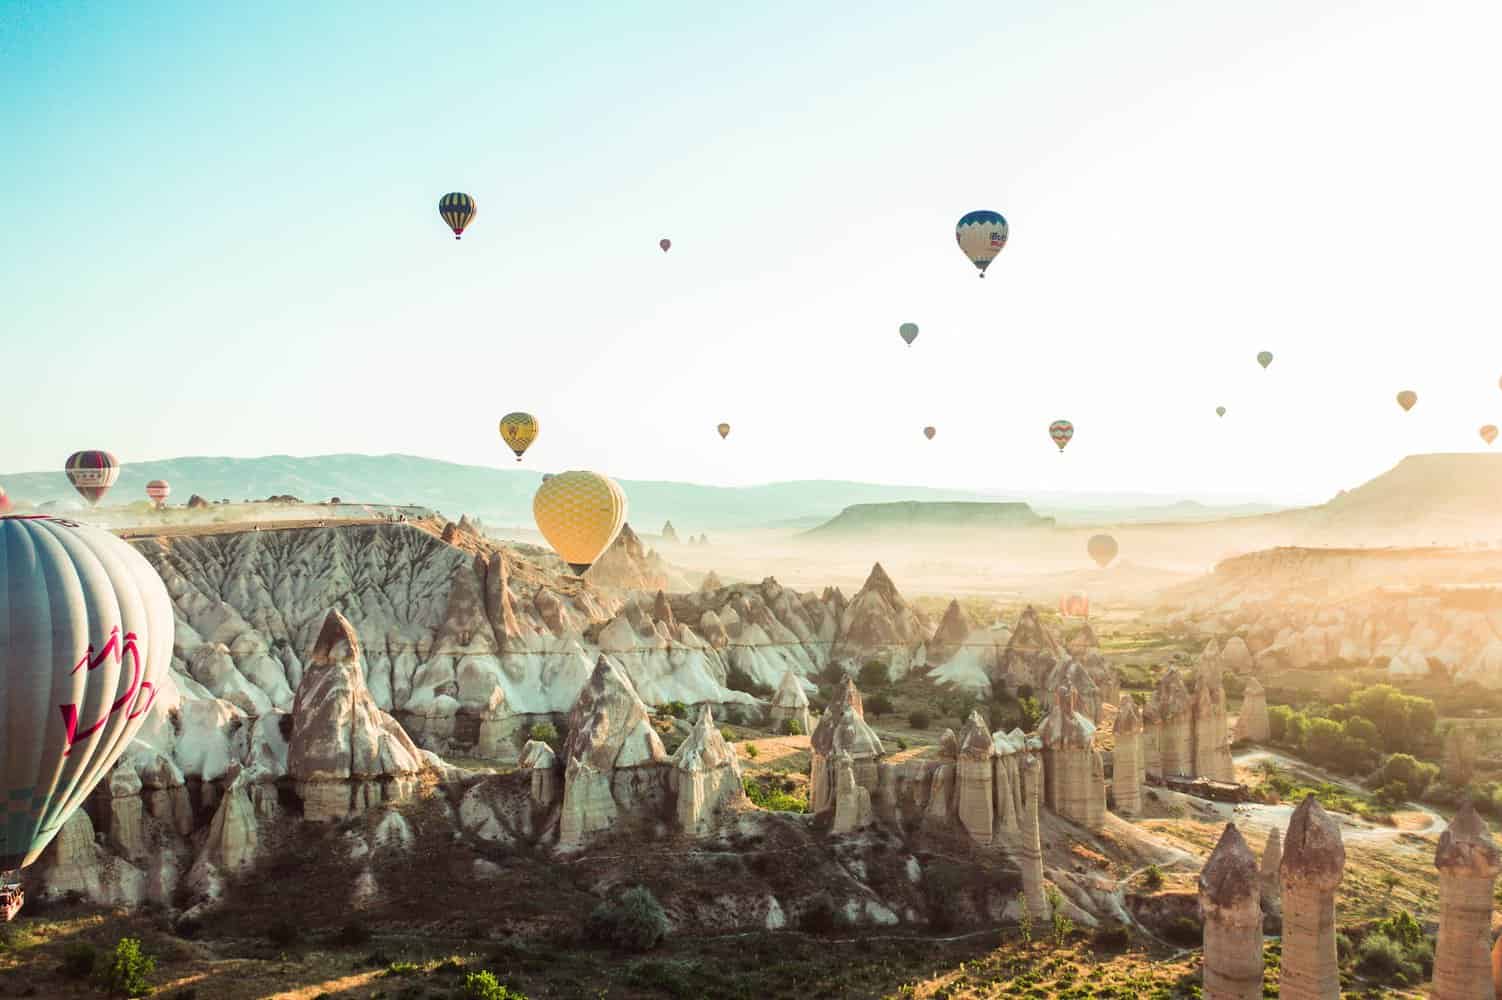 photo of hot air balloons on flight in cappadocia. one of the 16 biblical sites in turkey